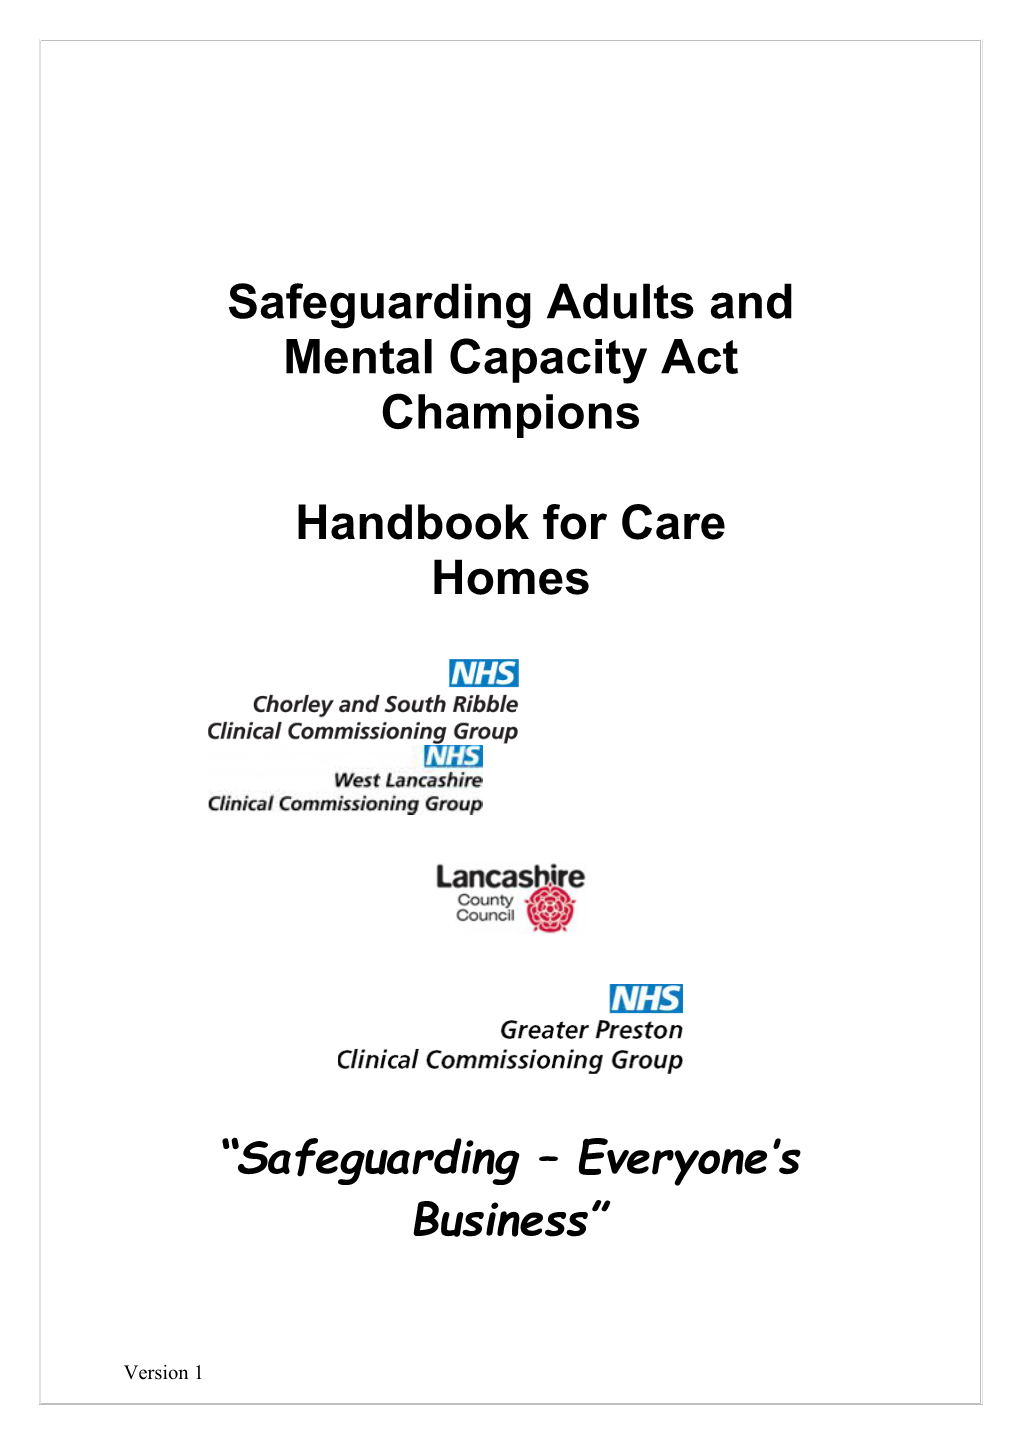 Safeguarding Adults and Mental Capacity Act Champions